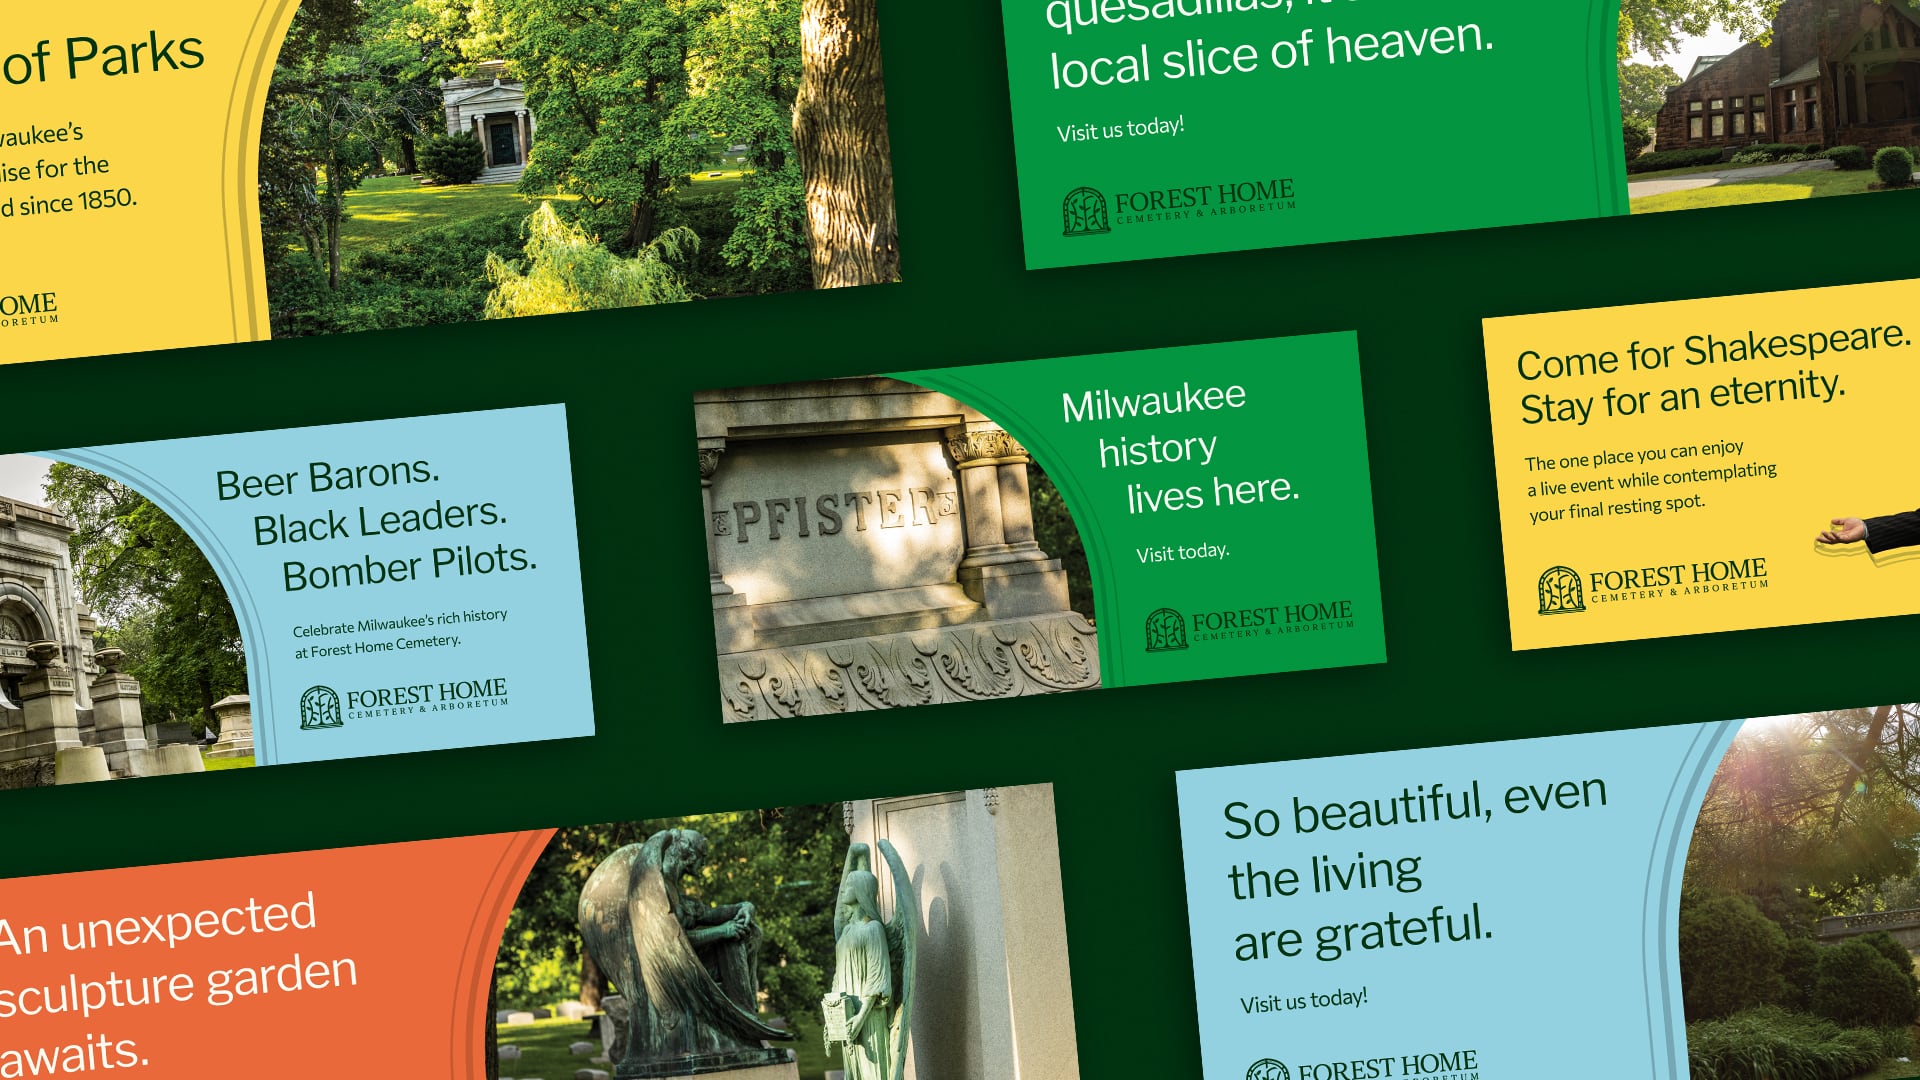 Forest Home Cemetery & Arboretum Messaging Options